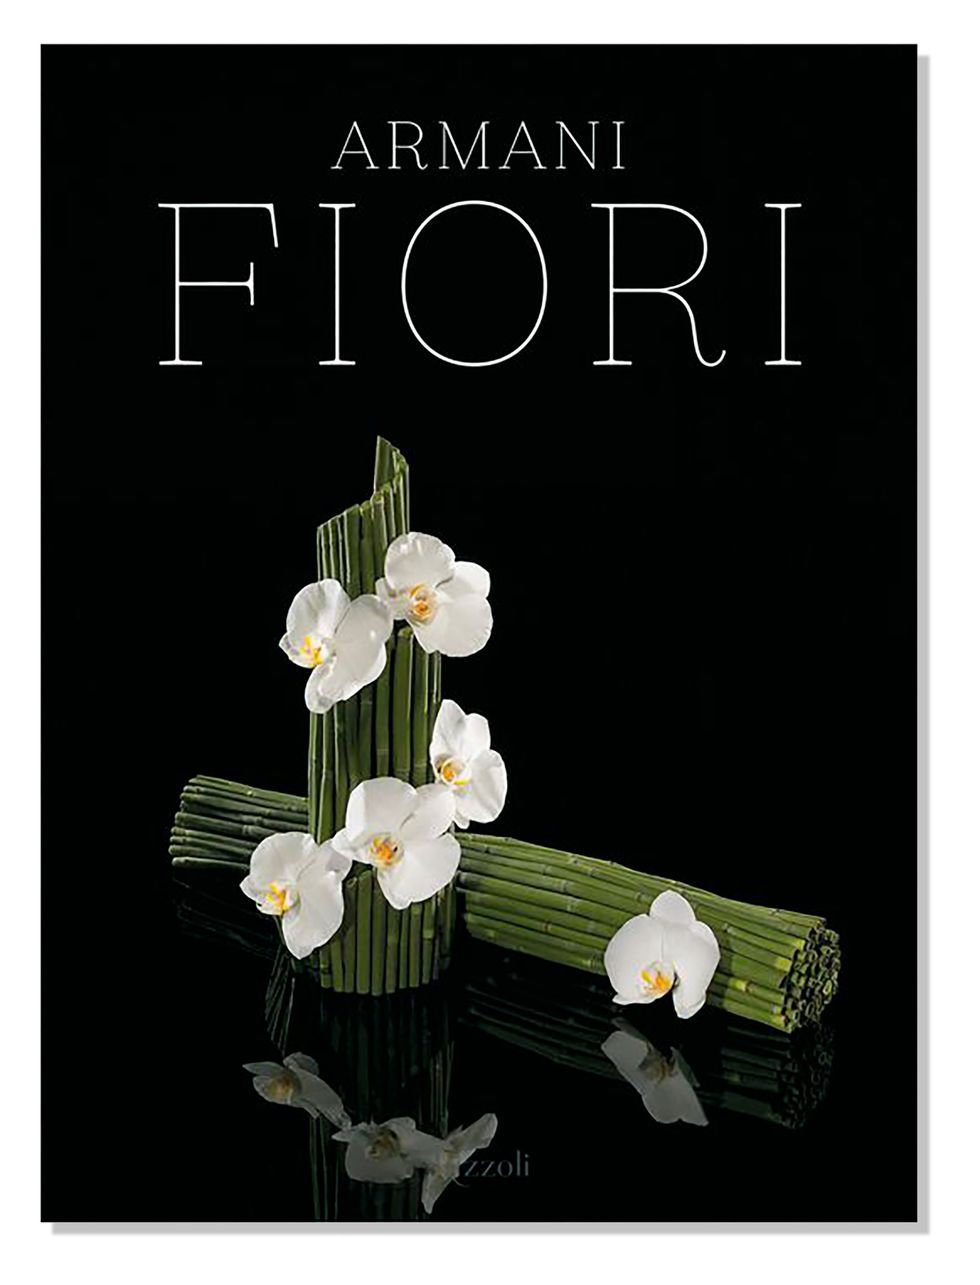 book cover with black background and green stalks wrapped in some delicate white flowers